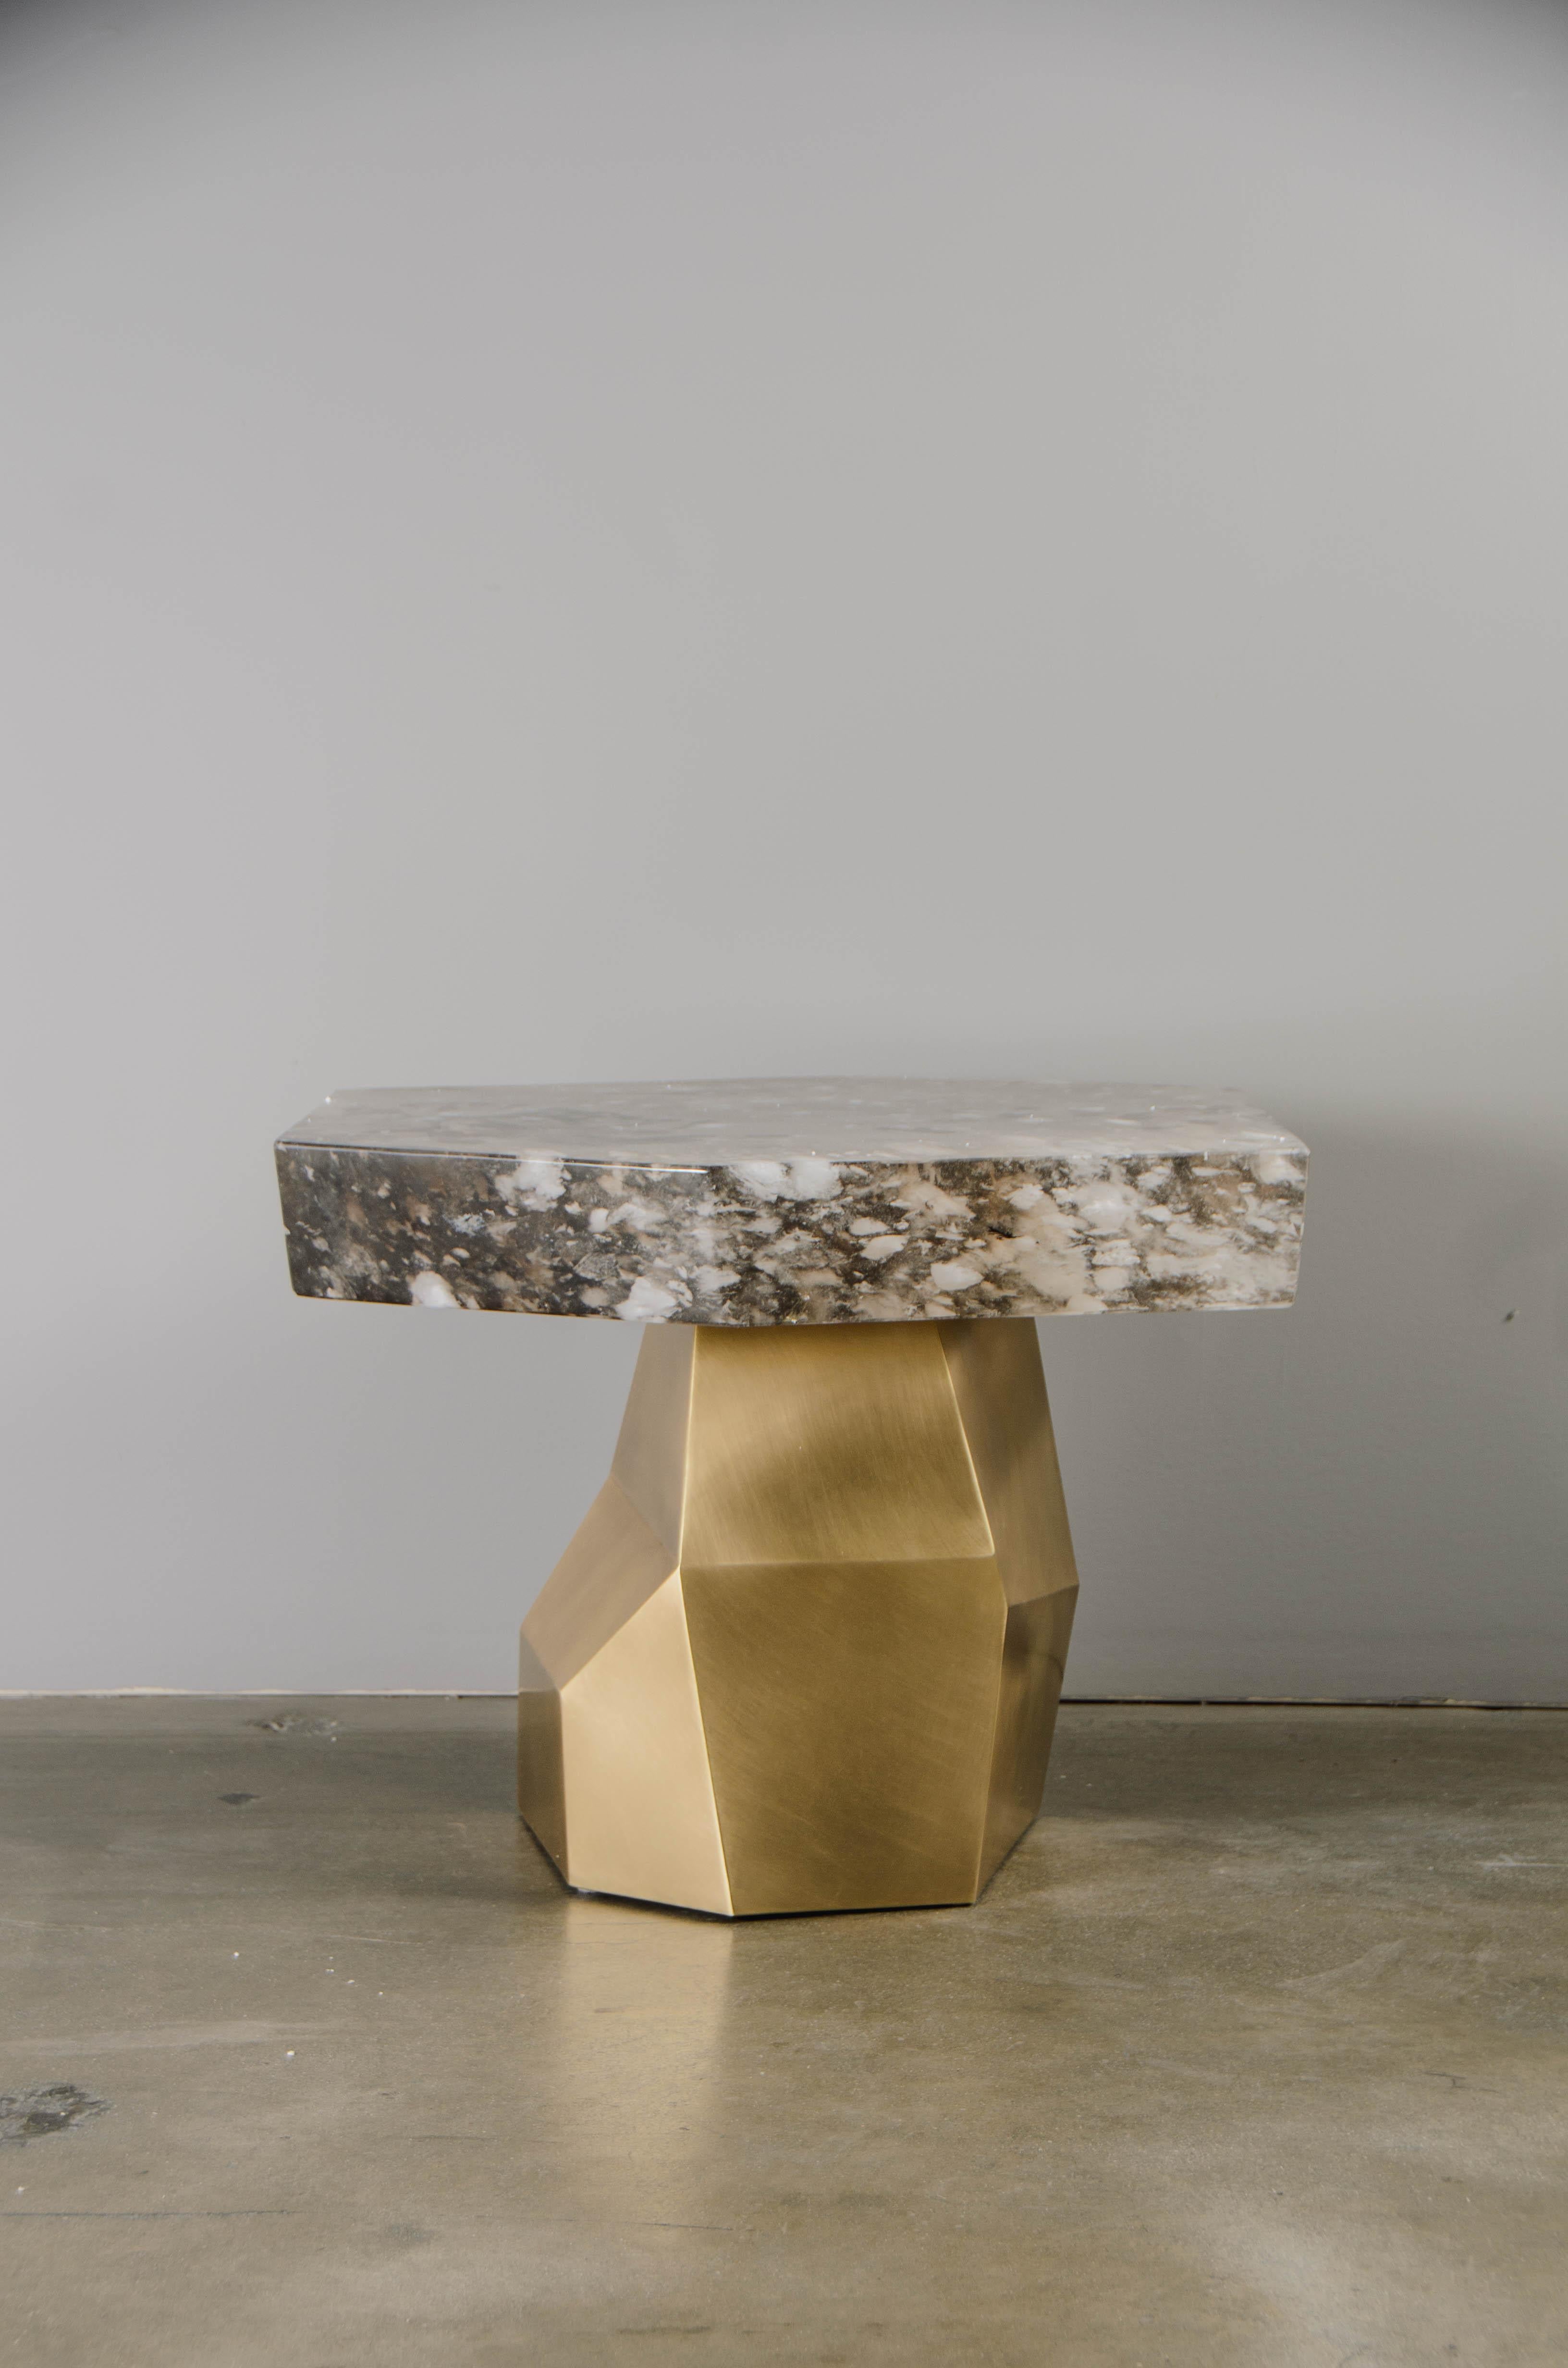 Facet Side Table with Smoke Crystal Top
Brass
Hand Repoussé
Smoked Crystal
Hand Carved
Limited Editon

Each piece is individually crafted and is unique. 

Repoussé is the traditional art of hand-hammering decorative relief onto sheet metal.